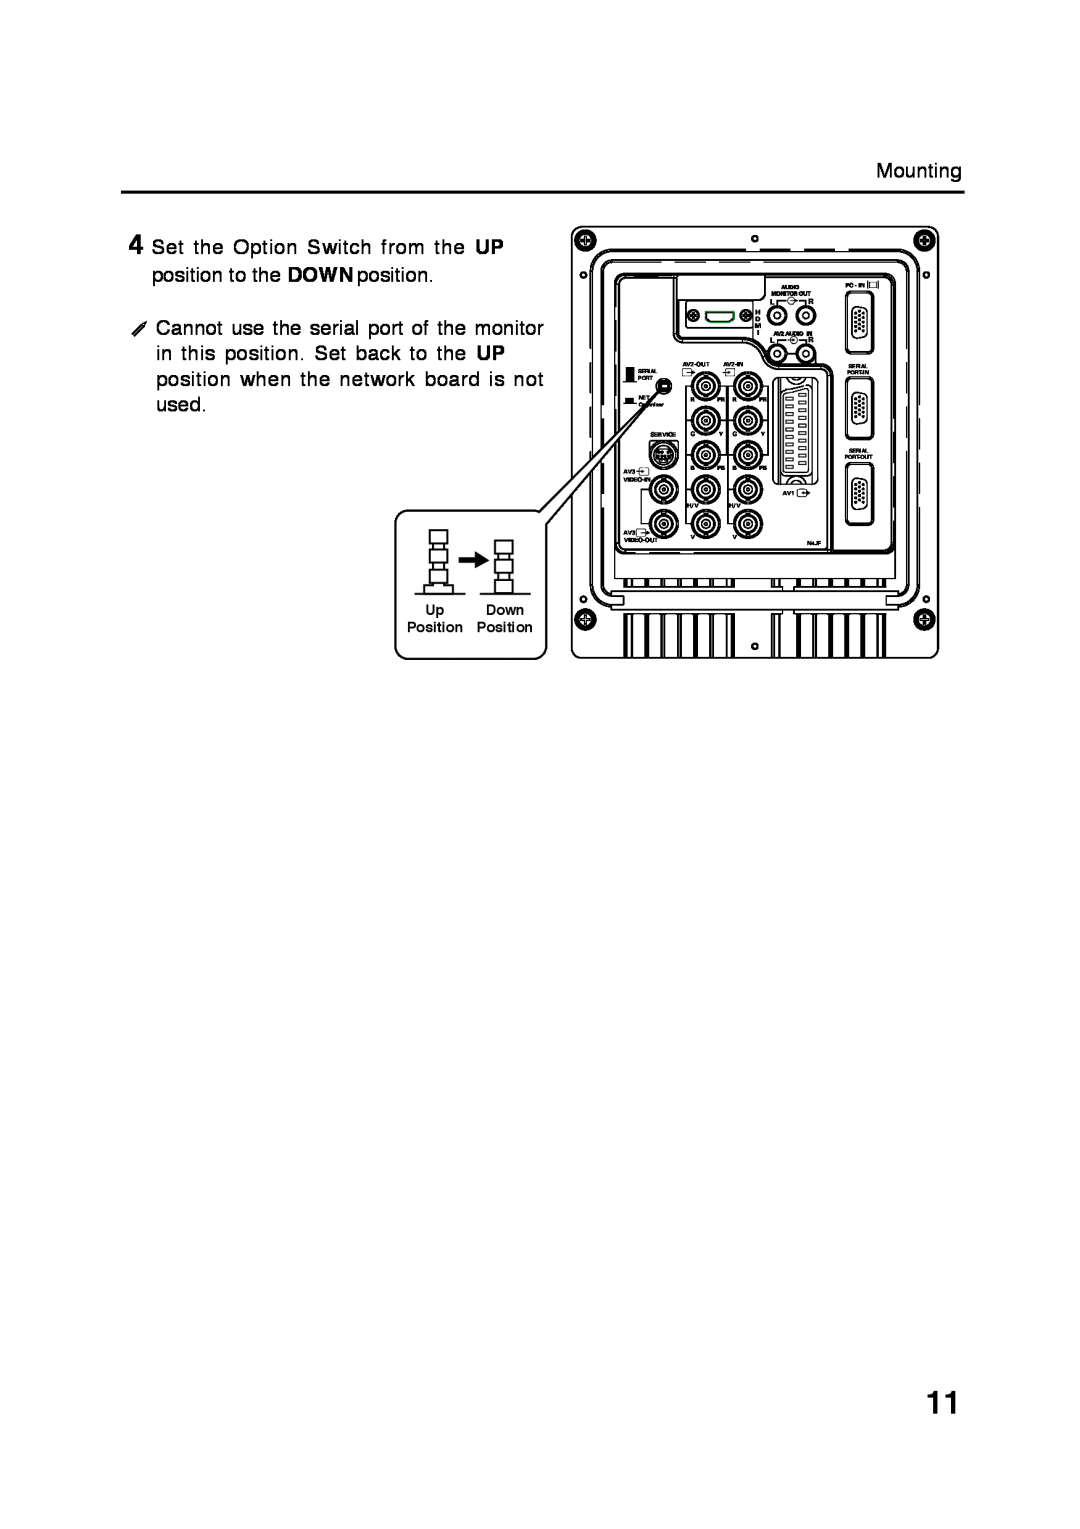 Sanyo POA-LN01 Mounting, Set the Option Switch from the UP position to the DOWN position, Up Down Position Position 